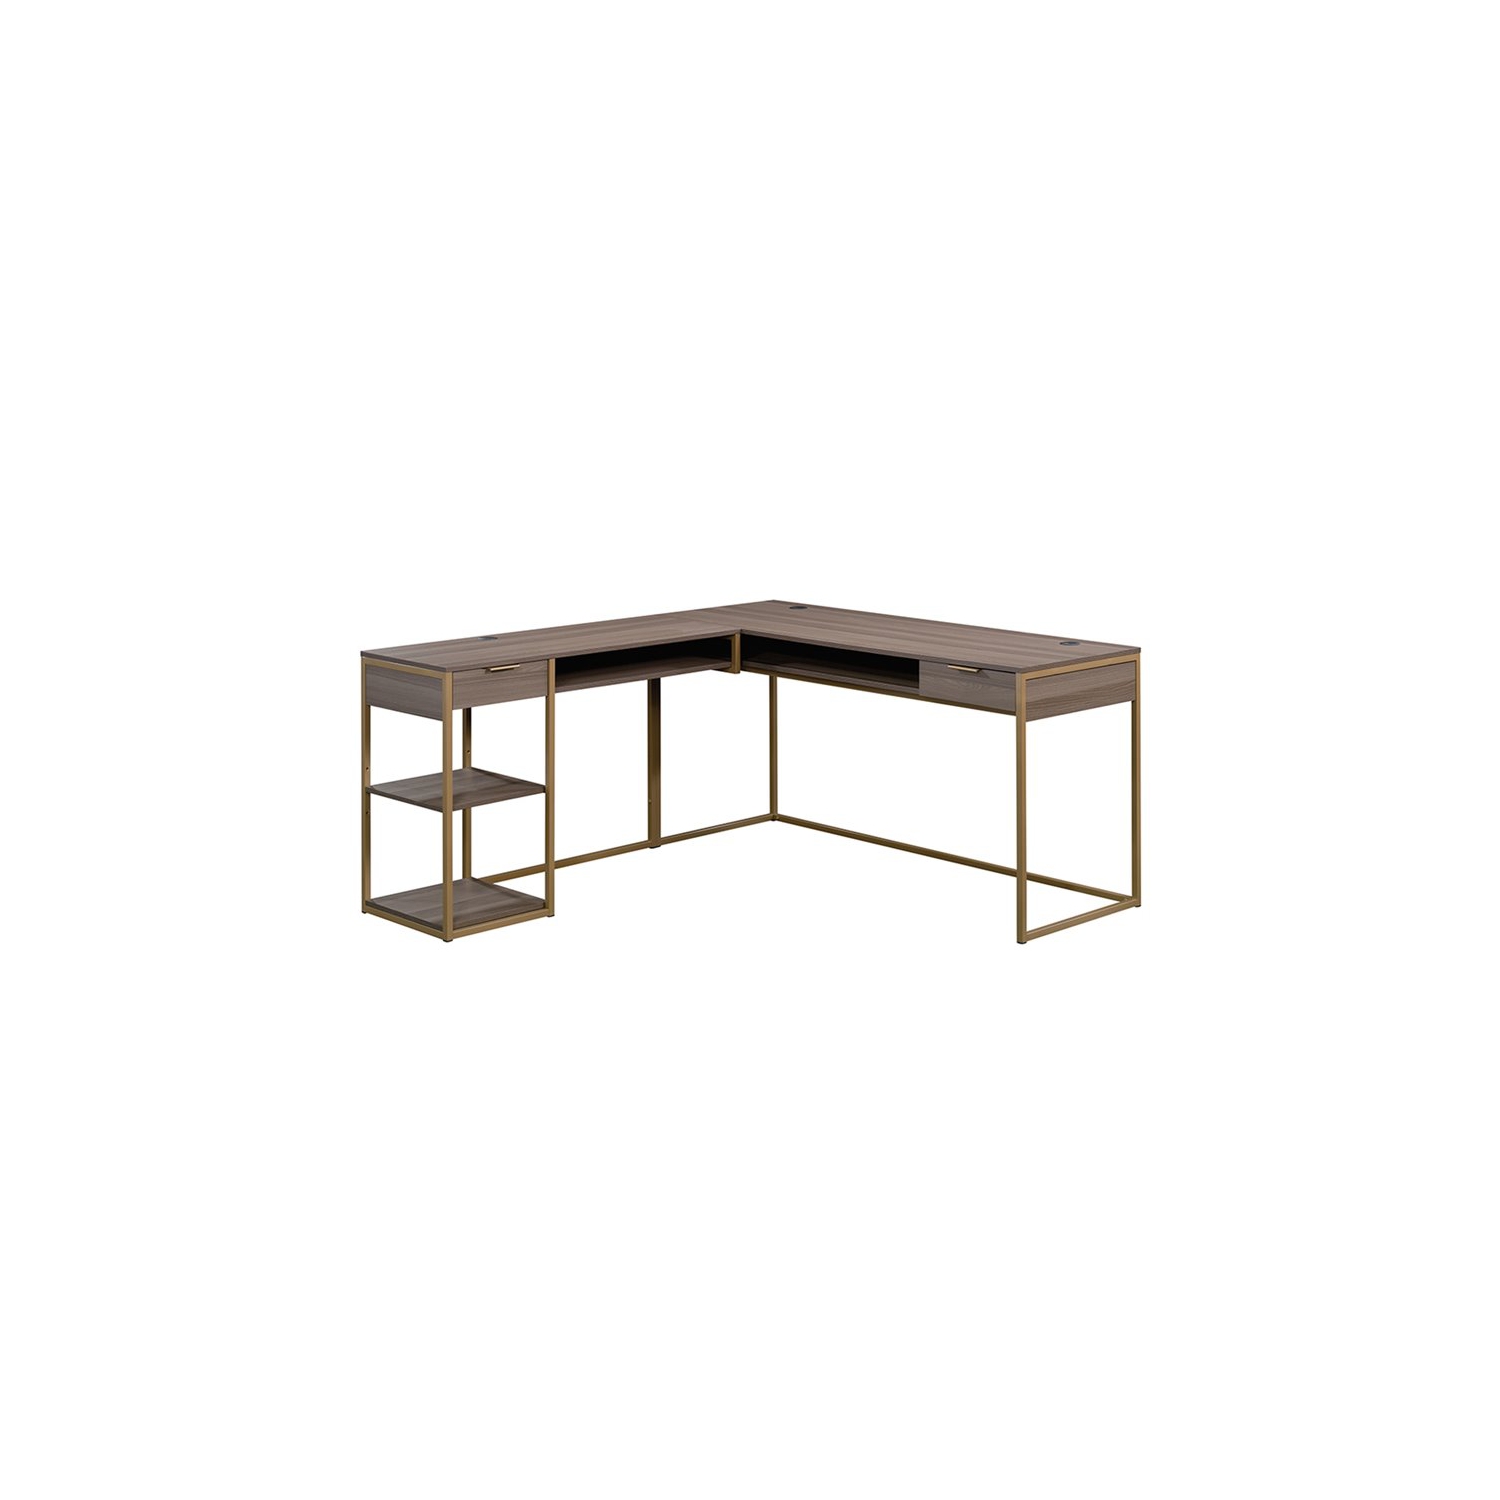 Pemberly Row L Shaped Writing Desk in Diamond Ash and Gold